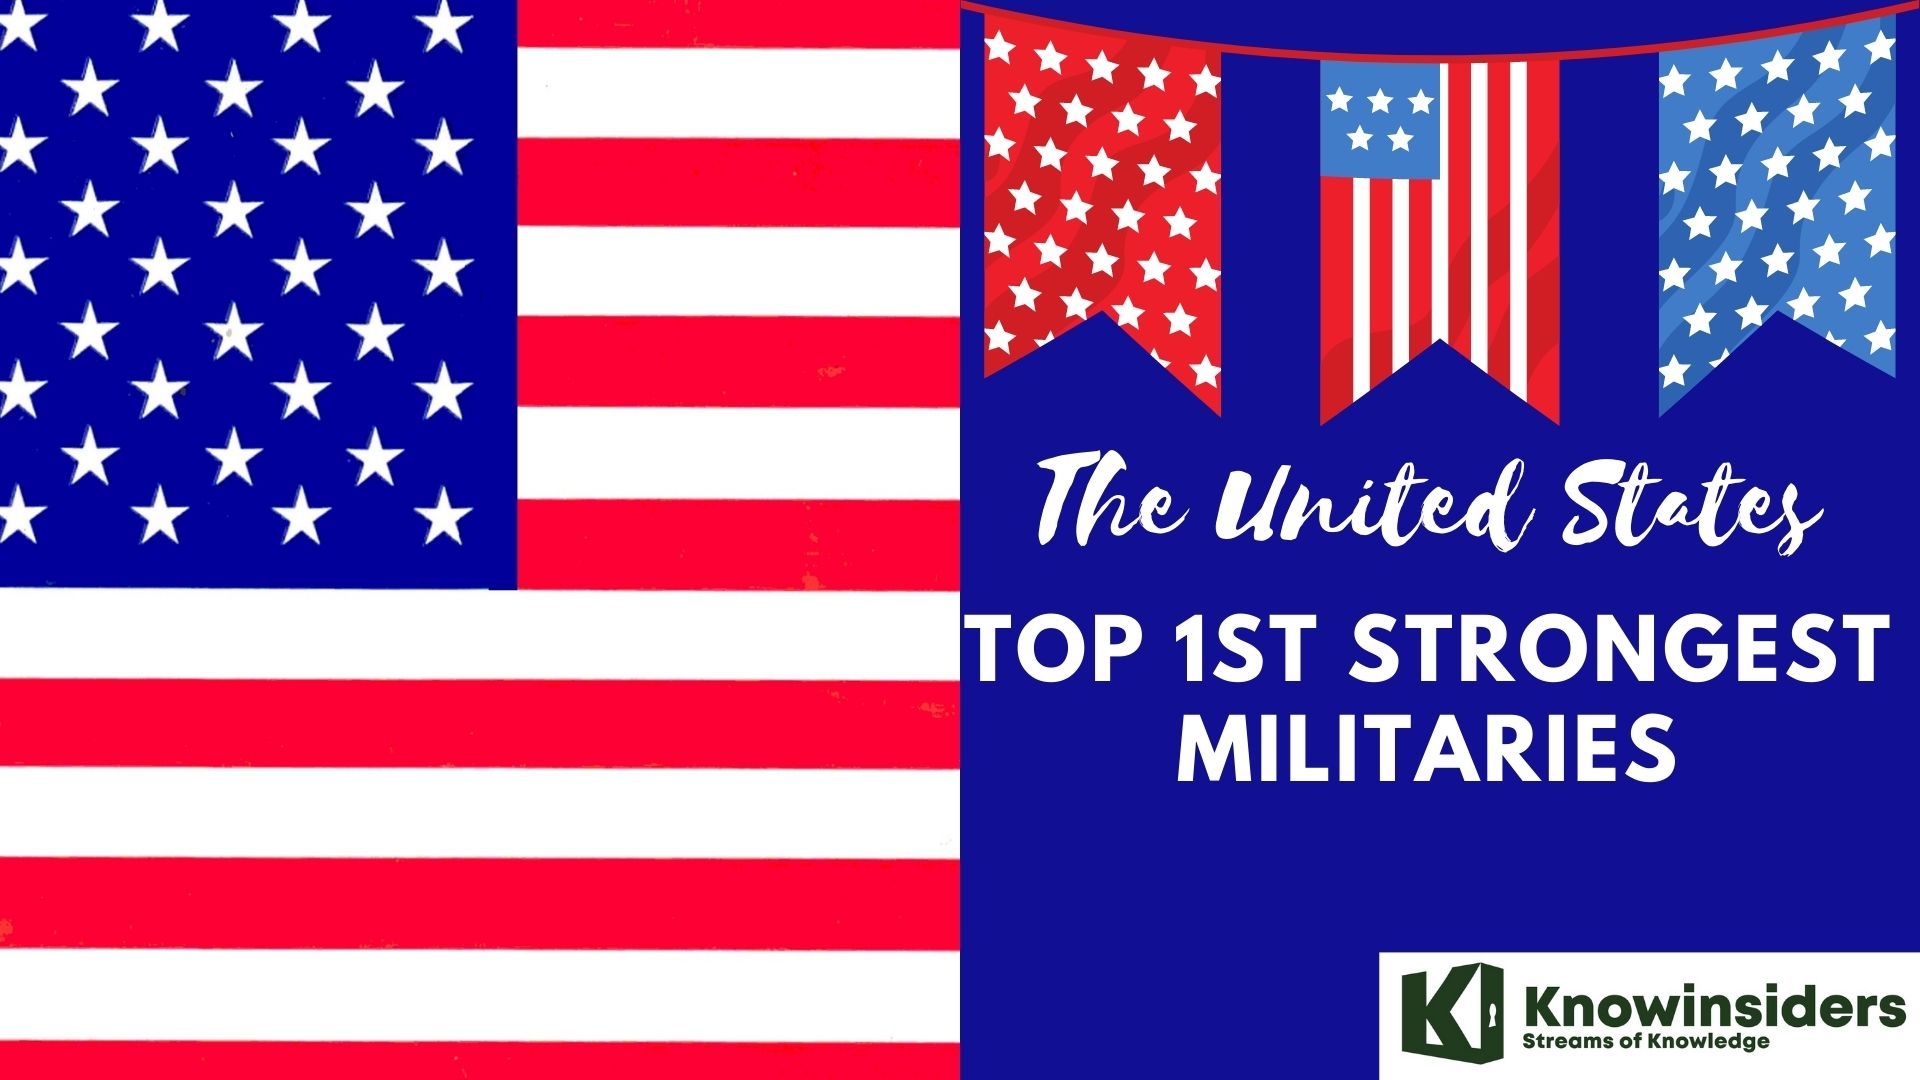 United States Army - Top 1st Strongest Militaries